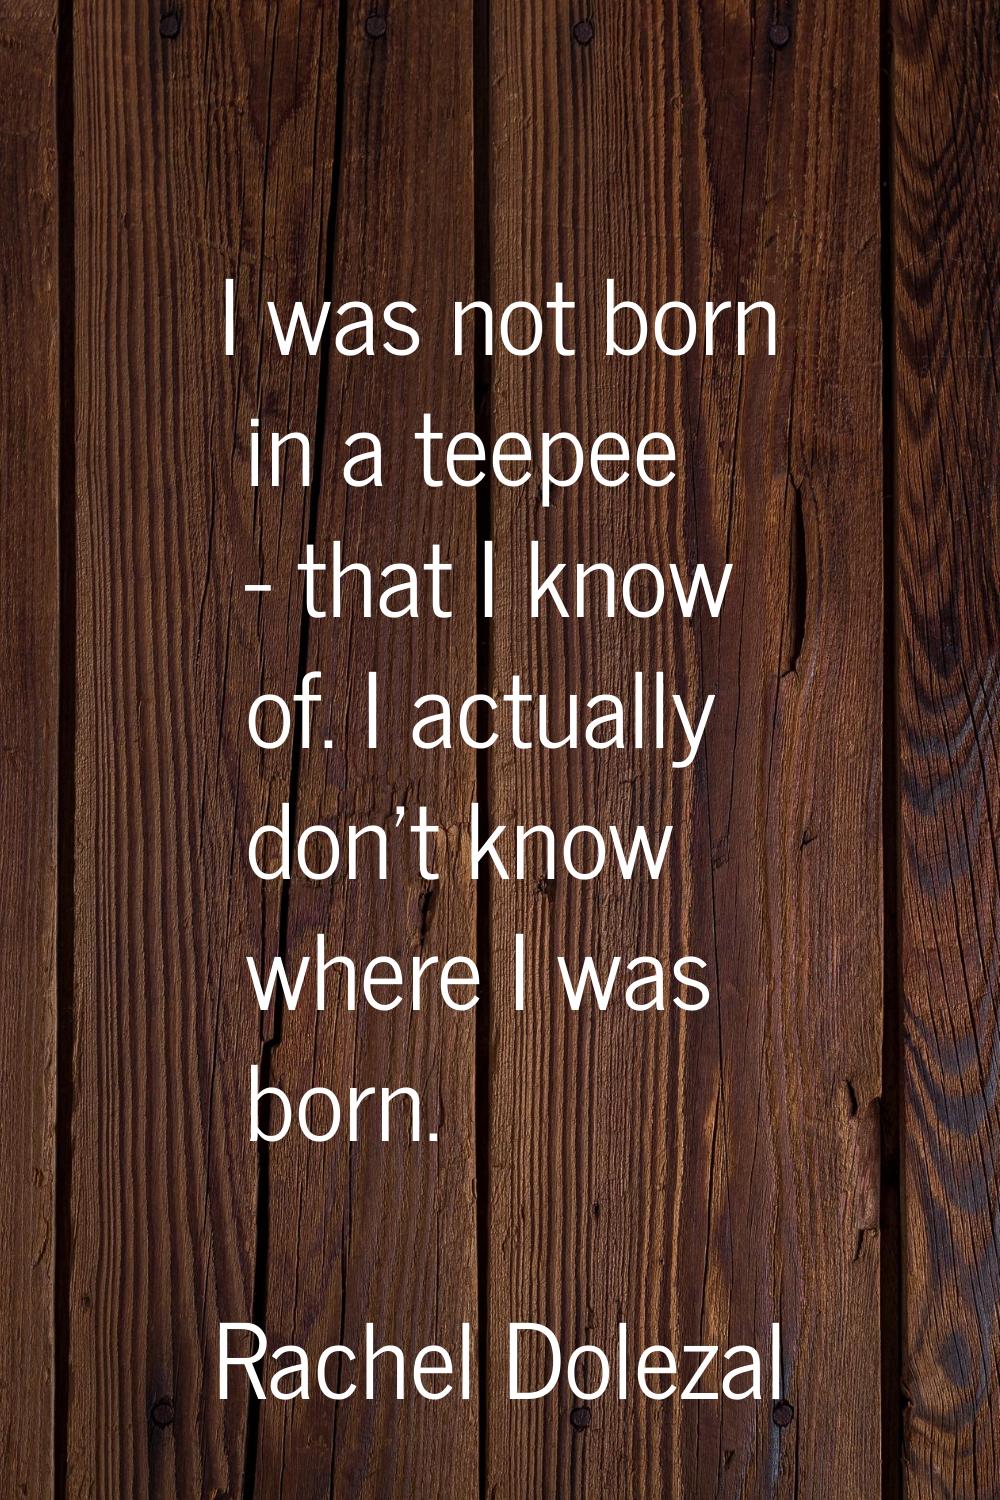 I was not born in a teepee - that I know of. I actually don't know where I was born.